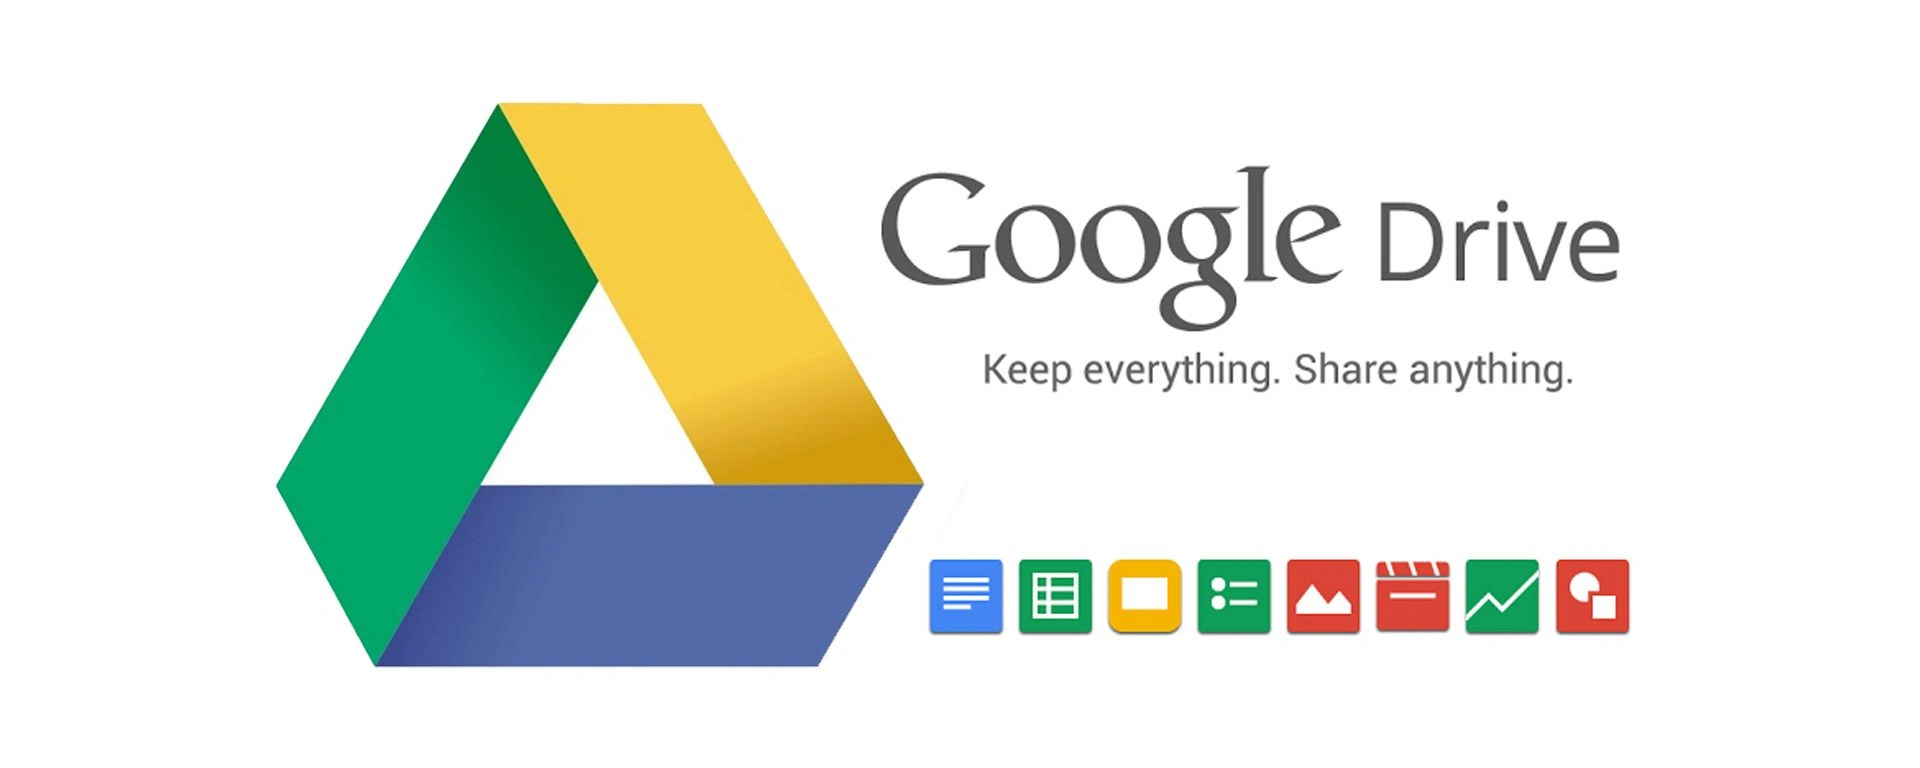 Top 10 Google Drive Management Tips You Wish You Knew Sooner featured image